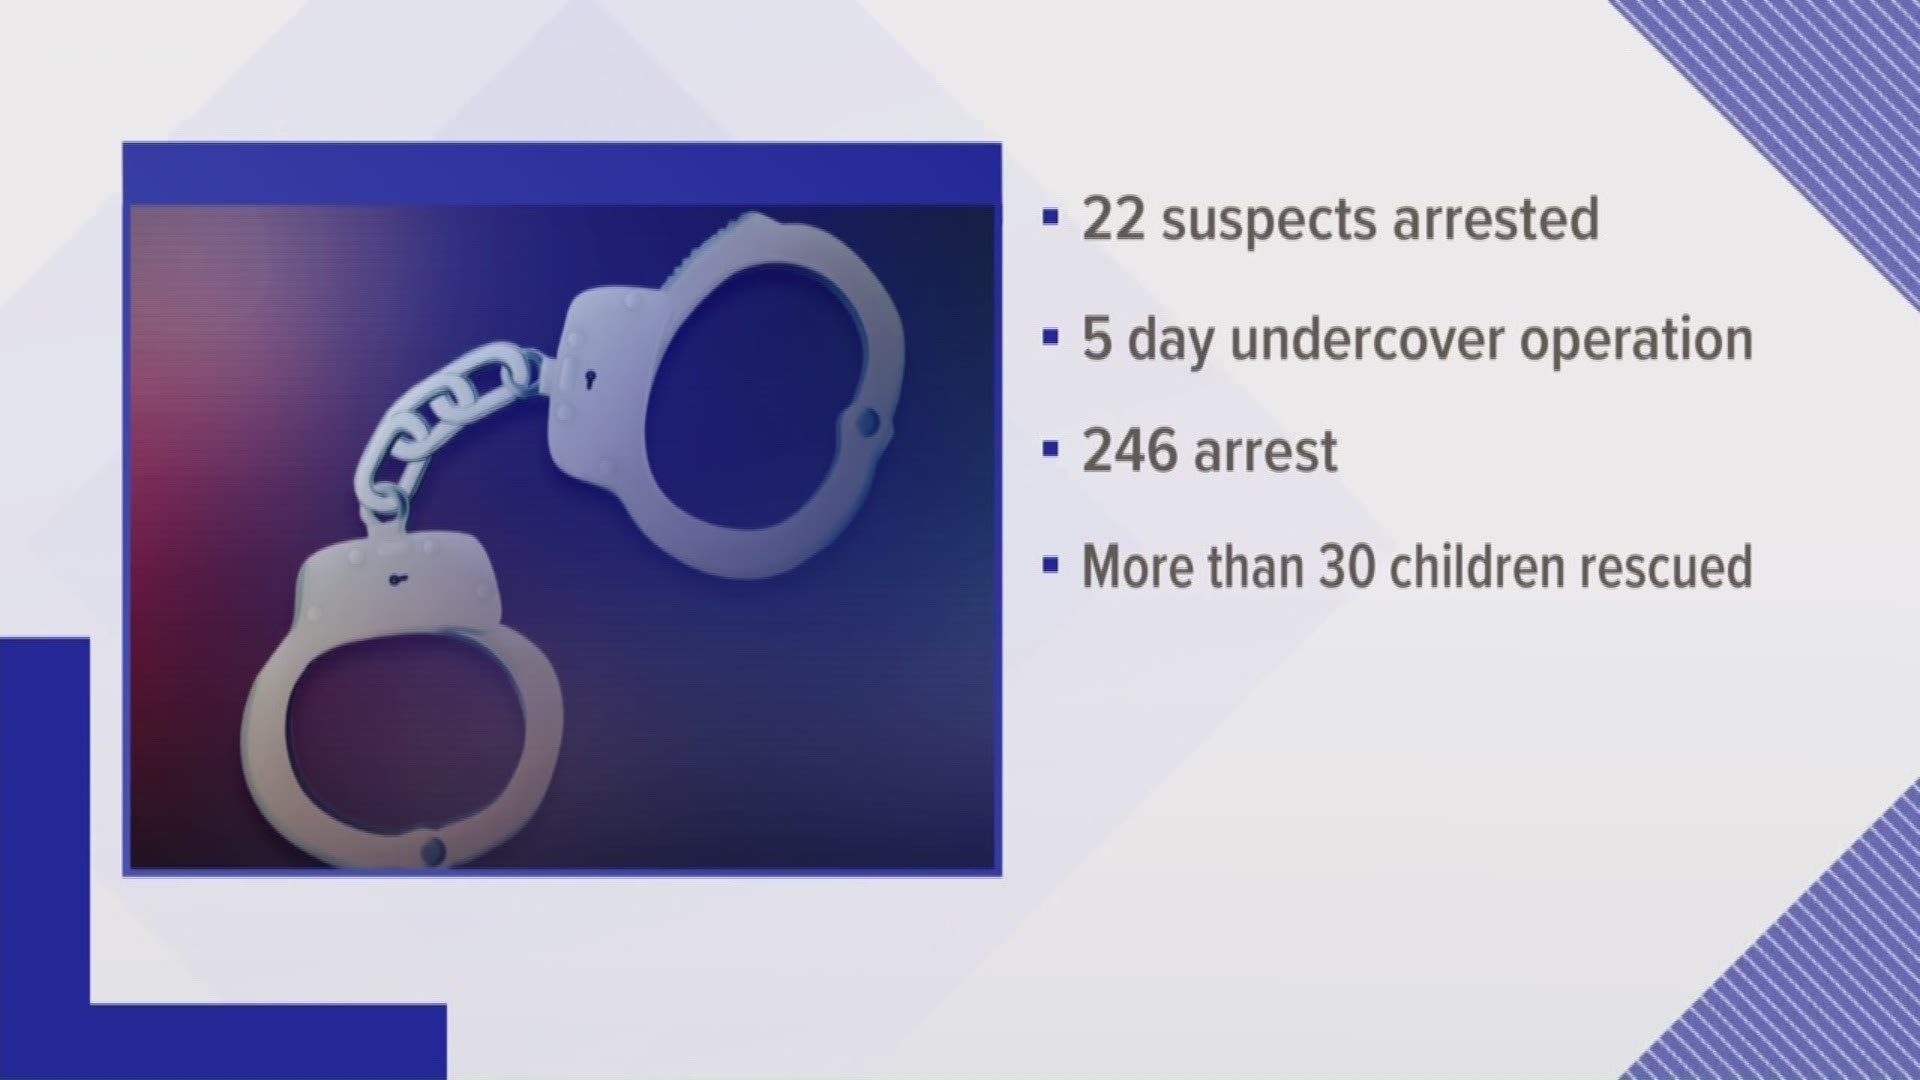 The Washington State Patrol arrested 22 people who targeted children for sexual abuse in Thurston County.